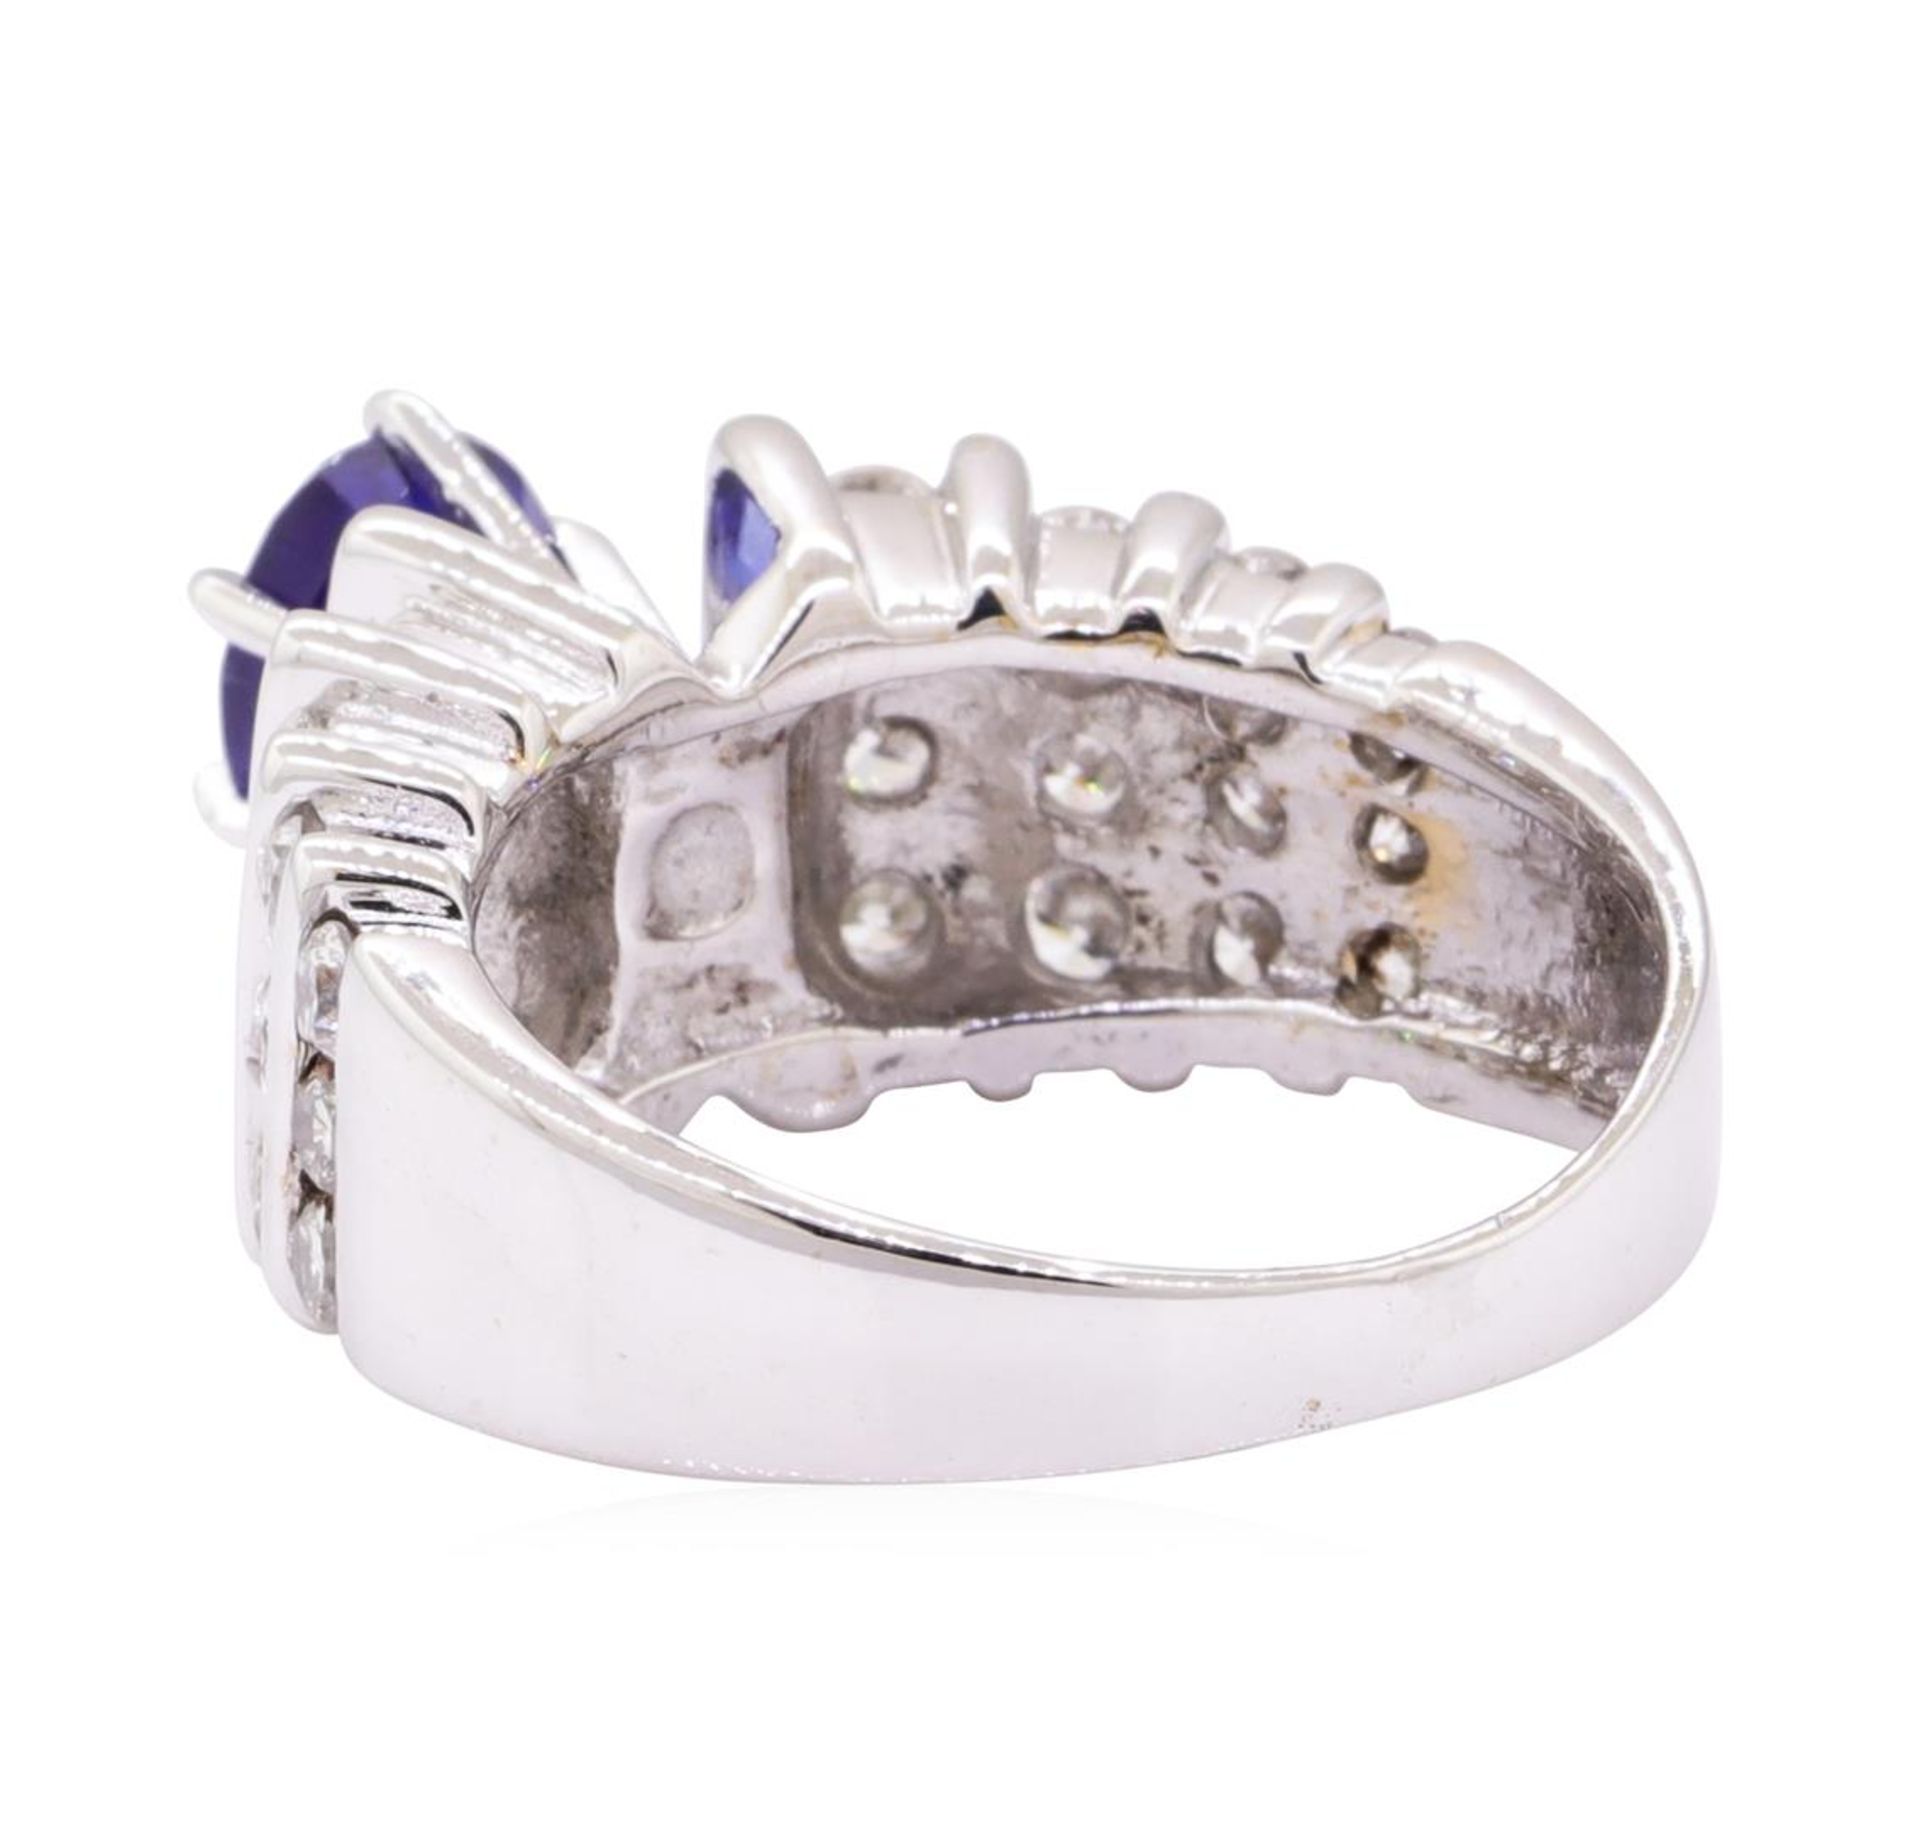 2.56 ctw Blue Sapphire And Diamond Ring - 14KT White Gold - Image 3 of 5